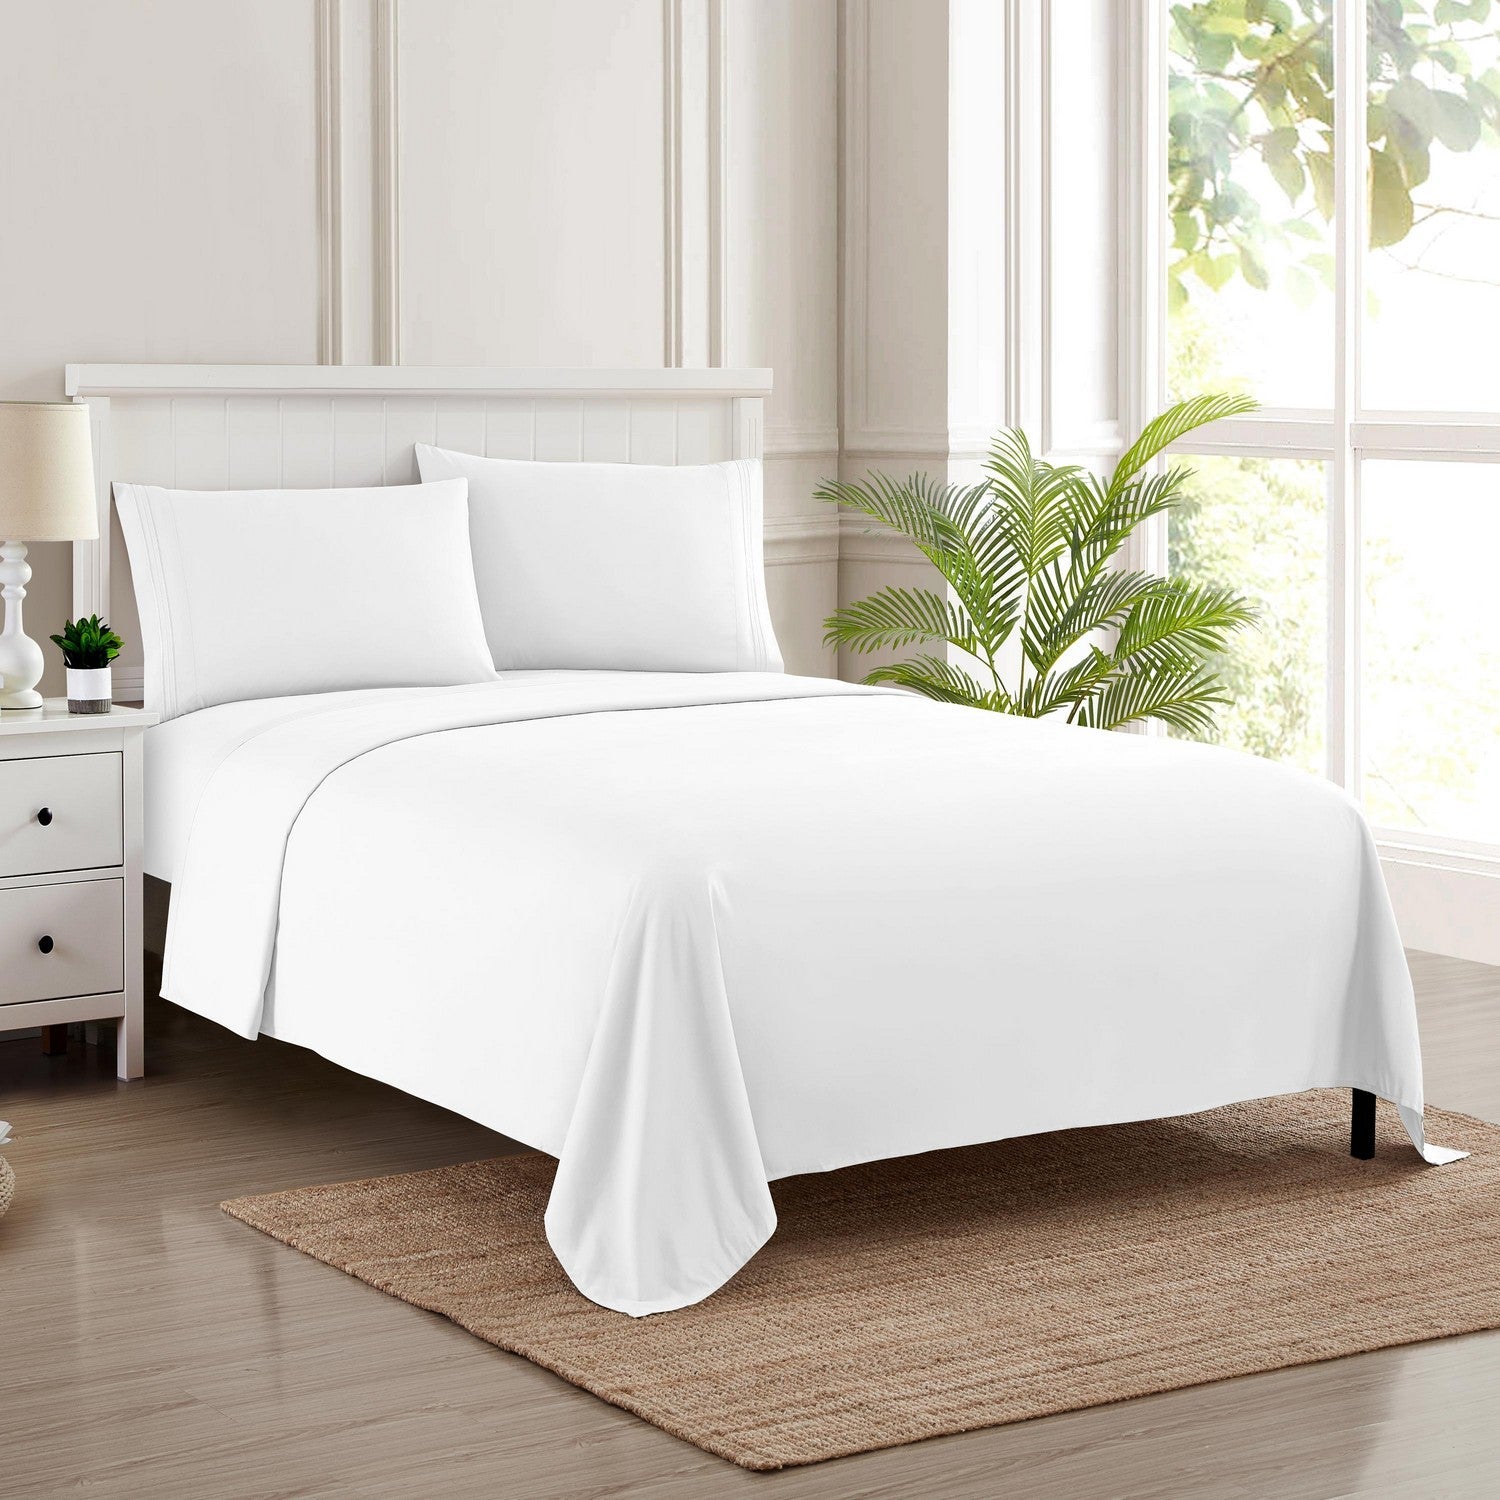 Classic 4-Piece Bed Sheet Set (White) - Bed